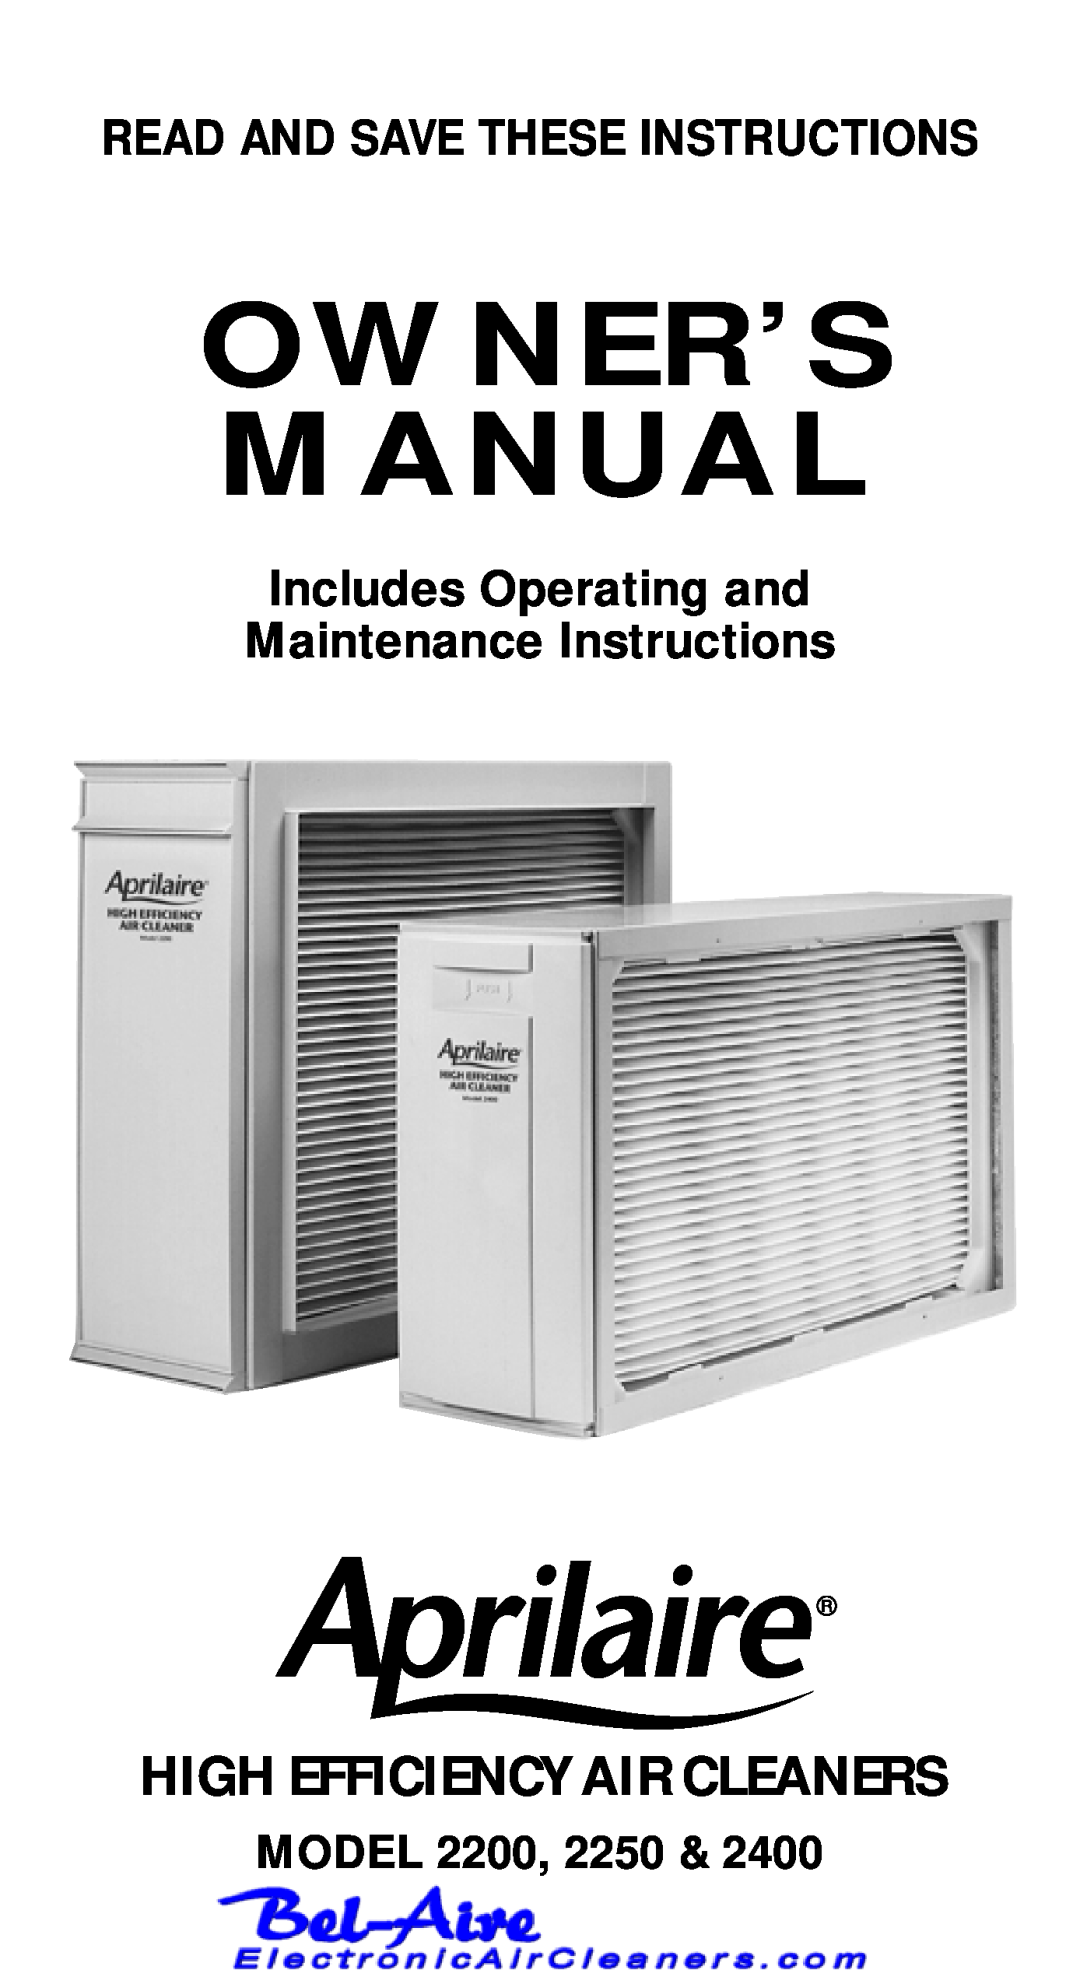 Aprilaire 2250 & 2400 owner manual High Efficiency Air Cleaners, Read And Save These Instructions, Model 